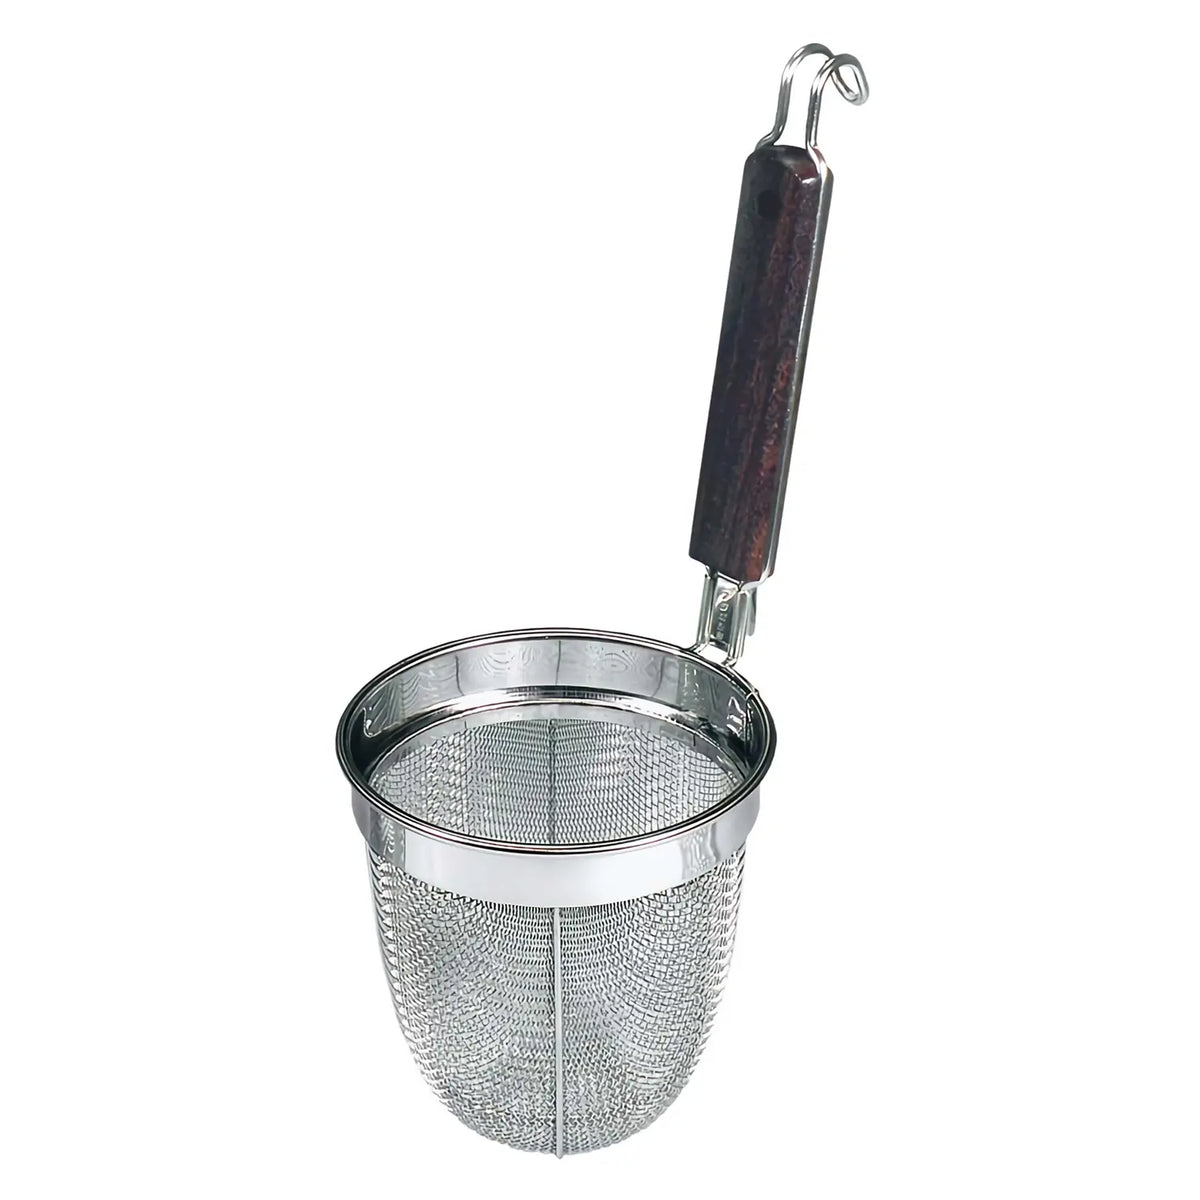 Fujiboshi Stainless Steel Heavy-Duty Udon Tebo Noodle Strainer Round Base with Wooden Handle